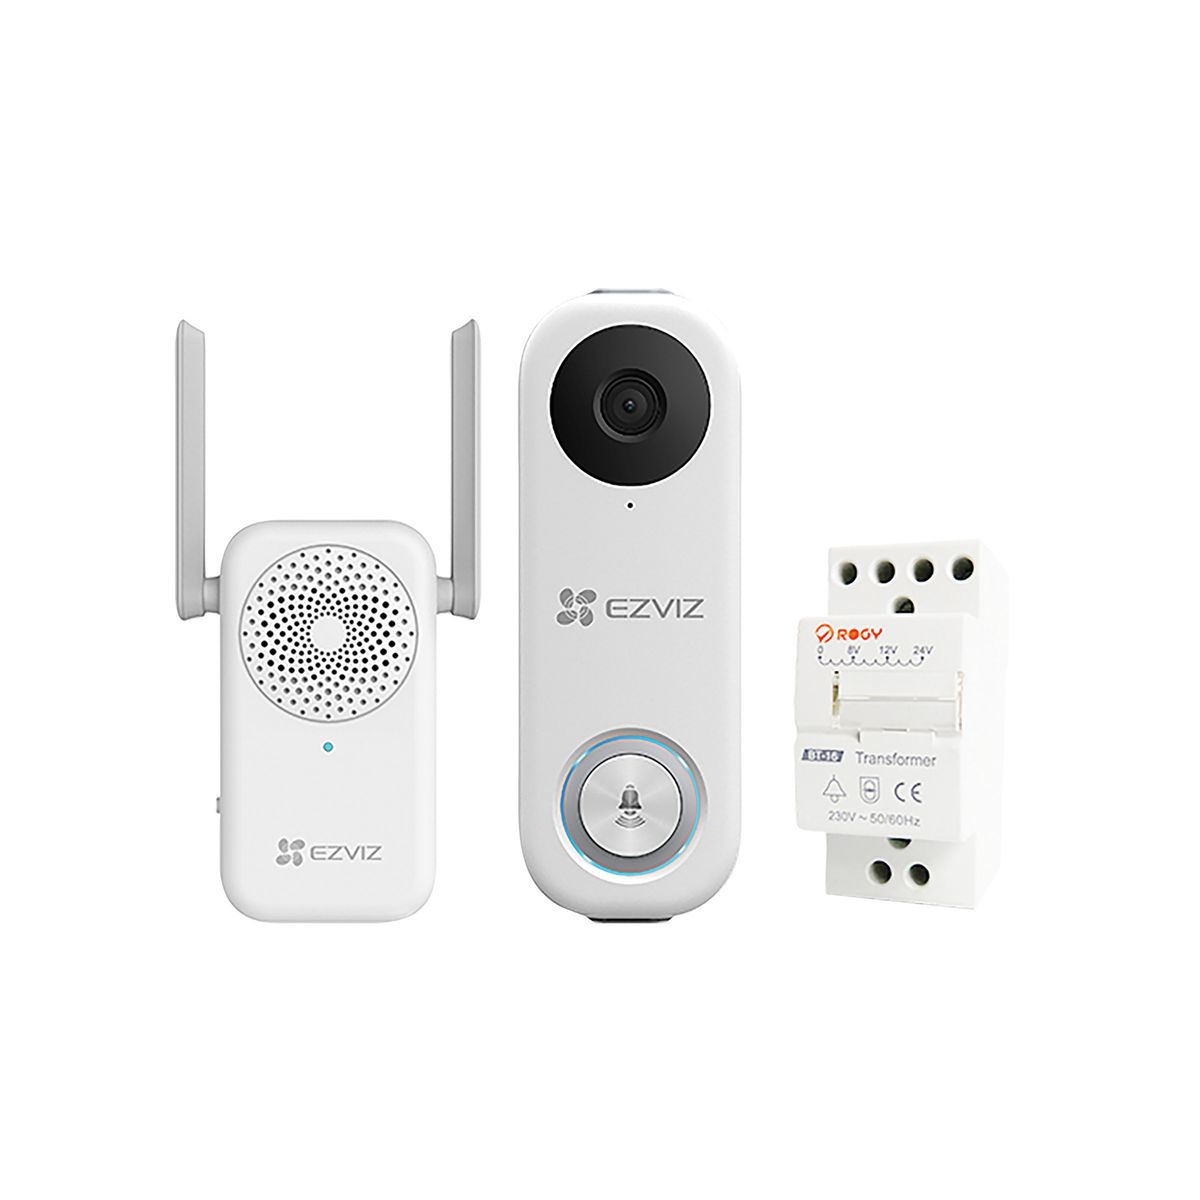 EZVIZ 2MP Bell Set with AI Person Detection and Chime, Two-Way Audio, 170° Field of View, H.265 Compression, Dual Band Wi-Fi, DB1C Kit